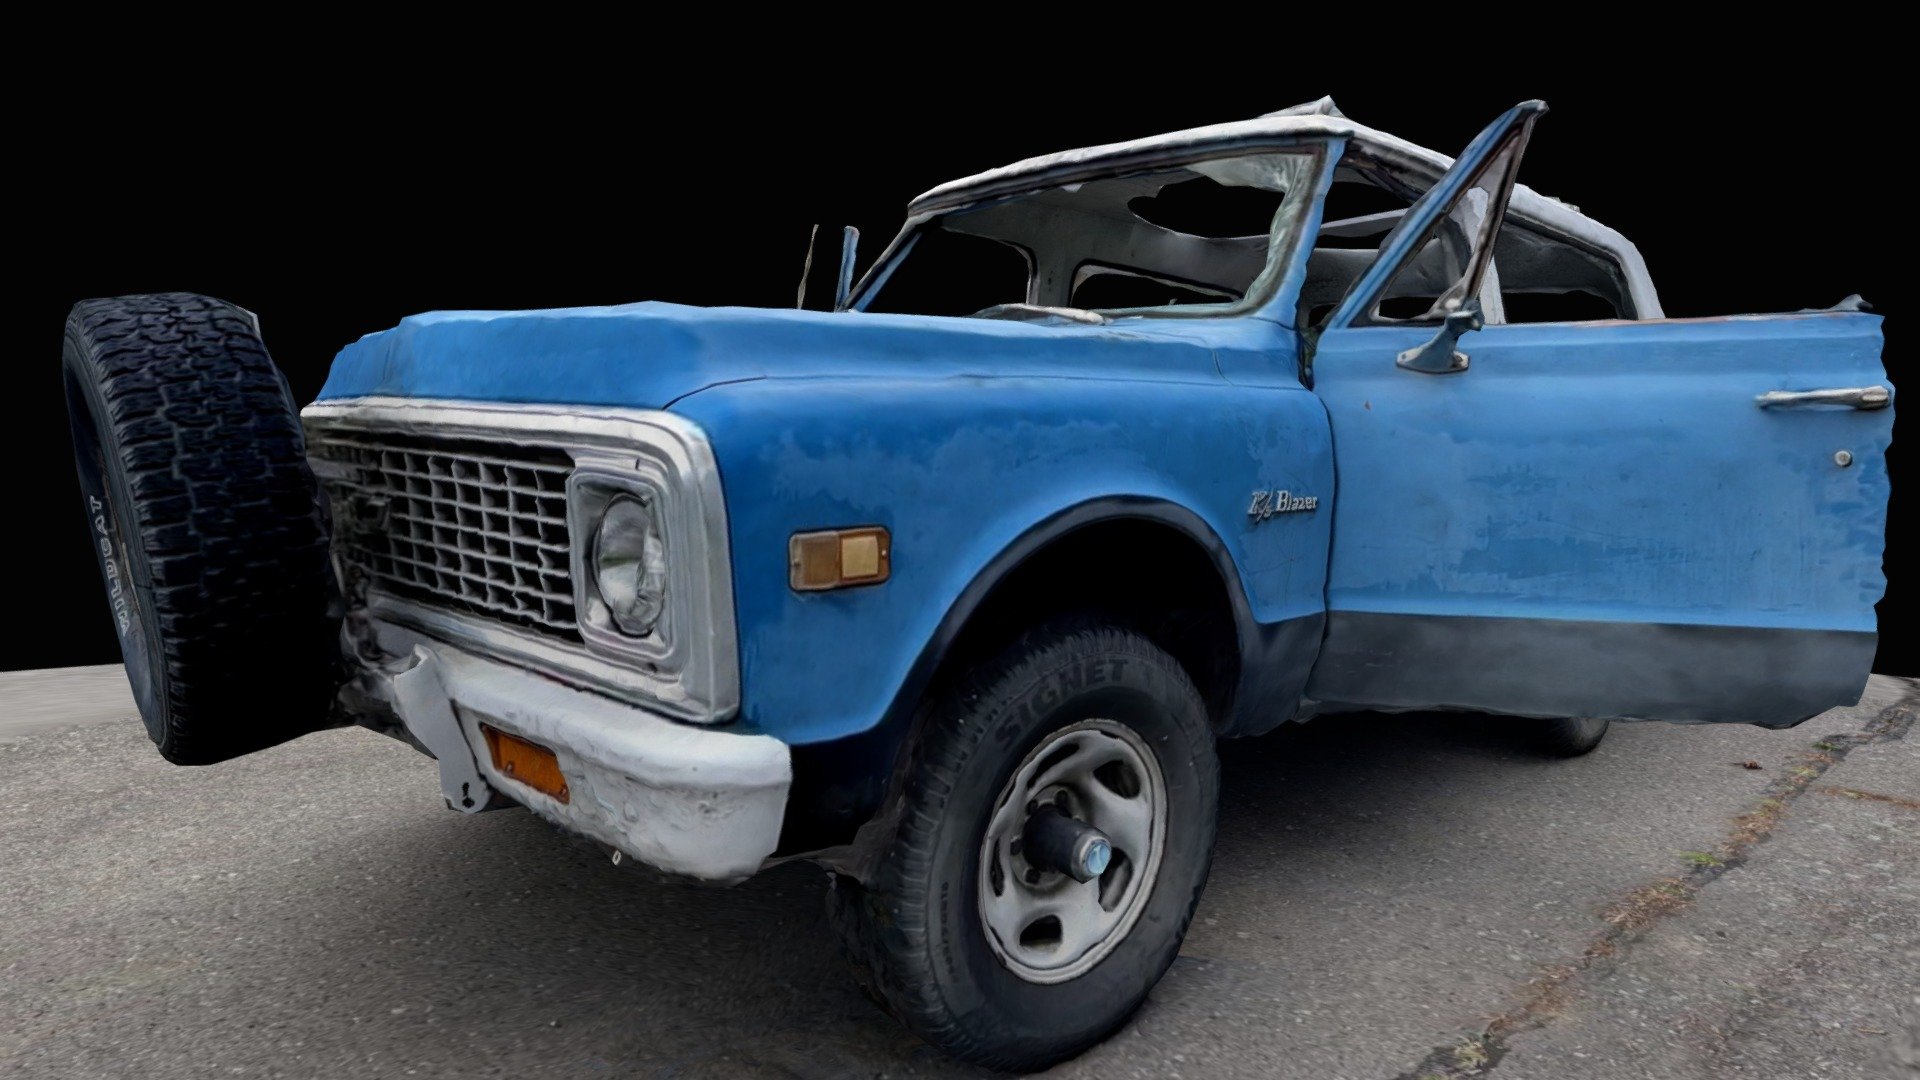 My wife's grandfather, Don McDowell, bought this 1972 Chevy K5 Blazer new.  50 years later I have digitized the exterior and interior in 3D with EveryPoint.  This will be a long term project I will be working on so I will document and share appropriately.  Enjoy......Carlos - 1972 Chevy K5 Blazer - 3D model by EveryPoint 3d model